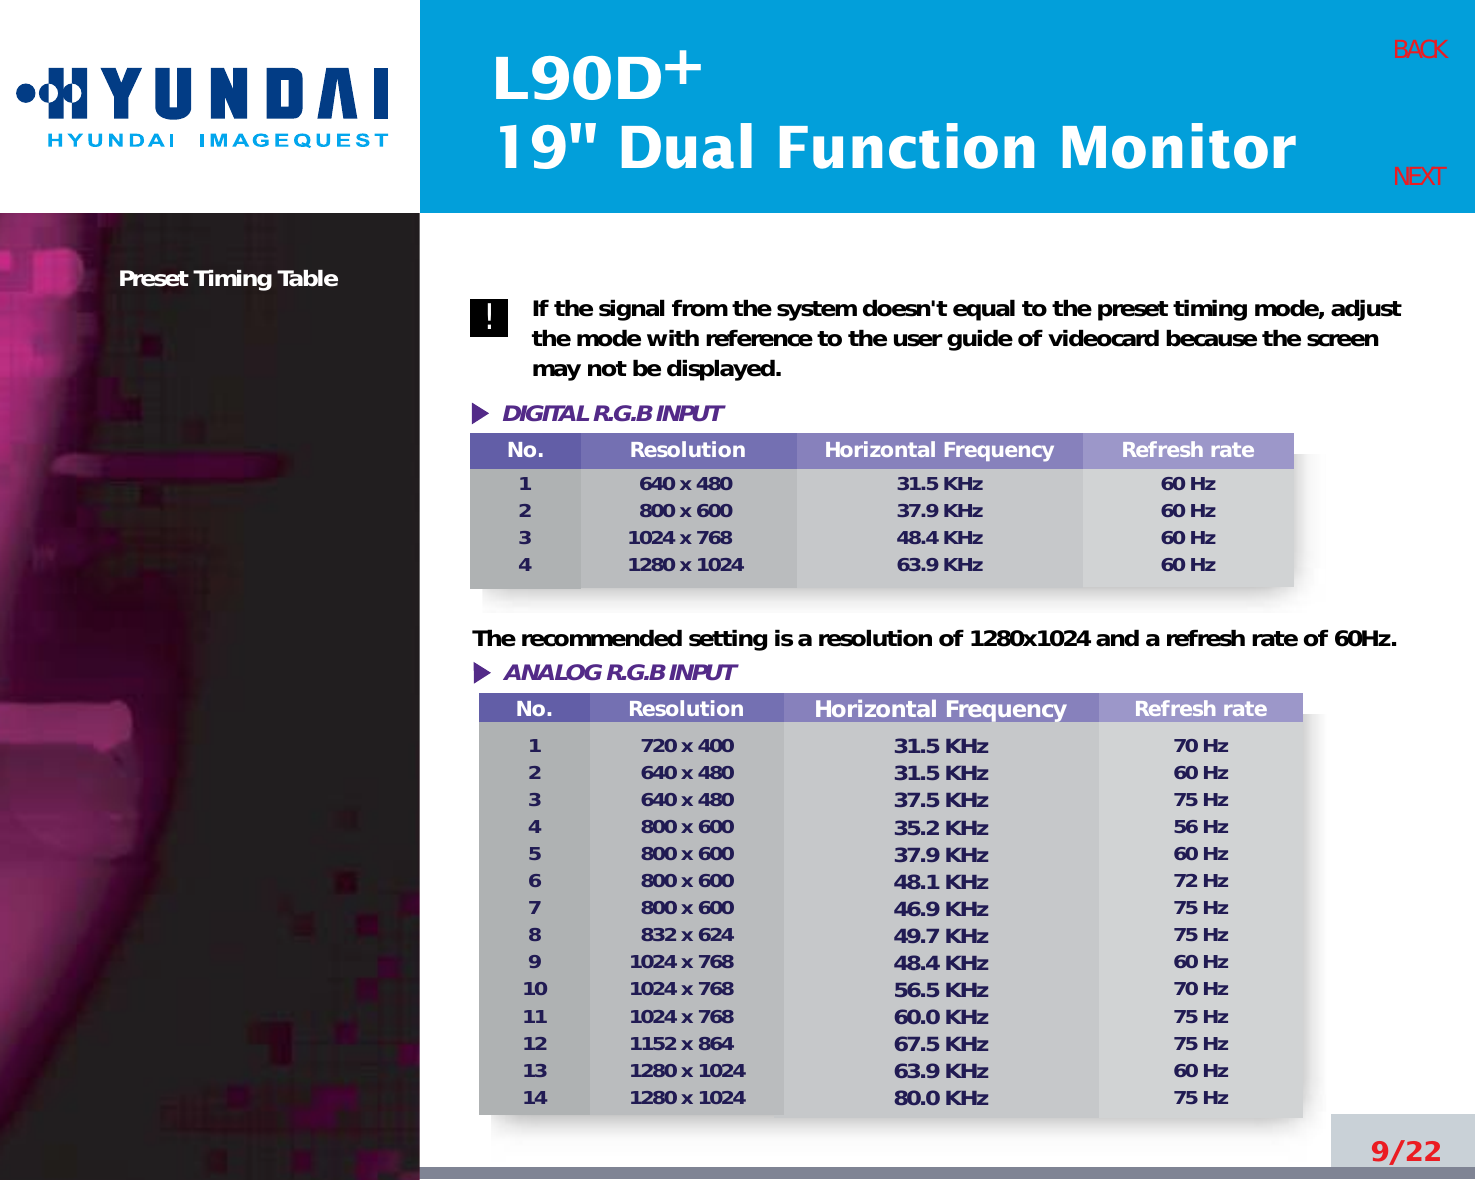 L90D19&quot; Dual Function Monitor+9/22BACKNEXTPreset Timing Table If the signal from the system doesn&apos;t equal to the preset timing mode, adjustthe mode with reference to the user guide of videocard because the screenmay not be displayed.The recommended setting is a resolution of 1280x1024 and a refresh rate of 60Hz.DIGITAL R.G.B INPUTNo.1234Resolution640 x 480800 x 6001024 x 7681280 x 1024Horizontal Frequency31.5 KHz37.9 KHz48.4 KHz63.9 KHzRefresh rate60 Hz60 Hz60 Hz60 Hz!No.1234567891011121314Resolution720 x 400640 x 480640 x 480 800 x 600800 x 600800 x 600800 x 600832 x 6241024 x 7681024 x 7681024 x 7681152 x 8641280 x 10241280 x 1024Horizontal Frequency31.5 KHz31.5 KHz37.5 KHz35.2 KHz37.9 KHz48.1 KHz46.9 KHz49.7 KHz48.4 KHz56.5 KHz60.0 KHz67.5 KHz63.9 KHz80.0 KHzRefresh rate70 Hz60 Hz75 Hz56 Hz60 Hz72 Hz75 Hz75 Hz60 Hz70 Hz75 Hz75 Hz60 Hz75 HzANALOG R.G.B INPUT 